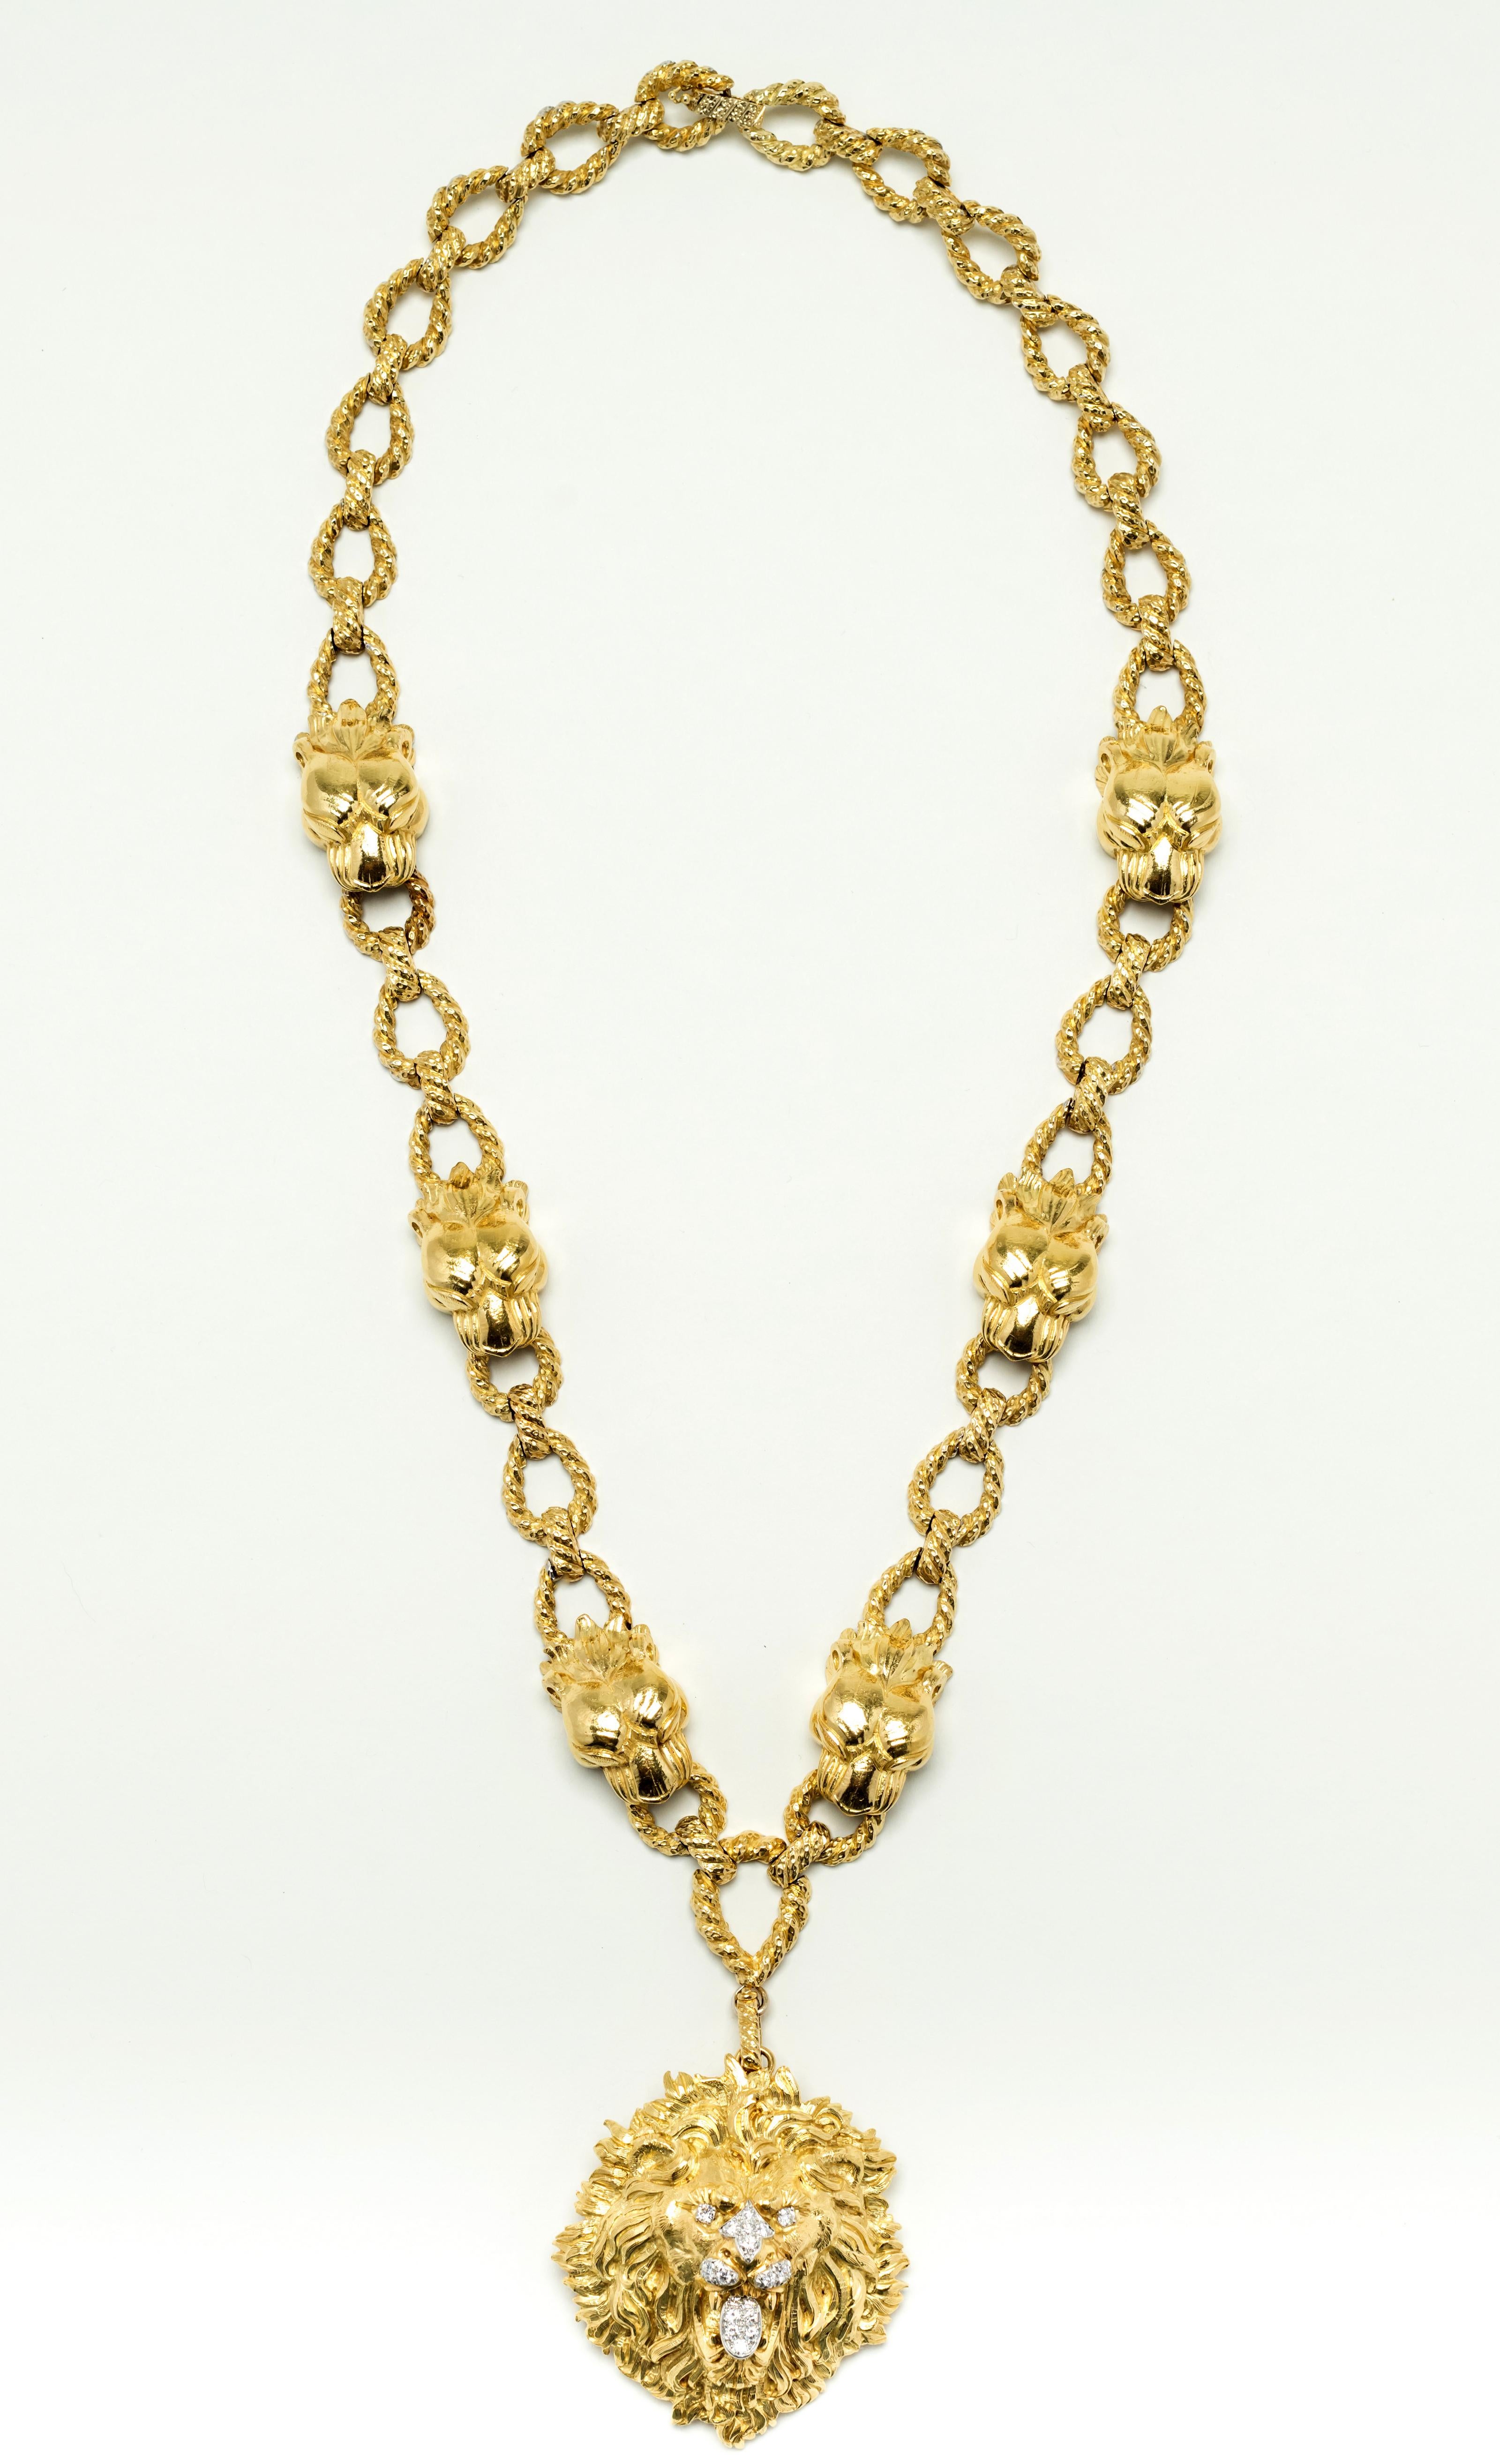 Magnificent 18 Karat gold signed David Webb necklace with detachable lion head pendant. The necklace consists of large rope style figured links interspersed with lion heads. The bottom link has a detachable clasp that supports a highly detailed lion